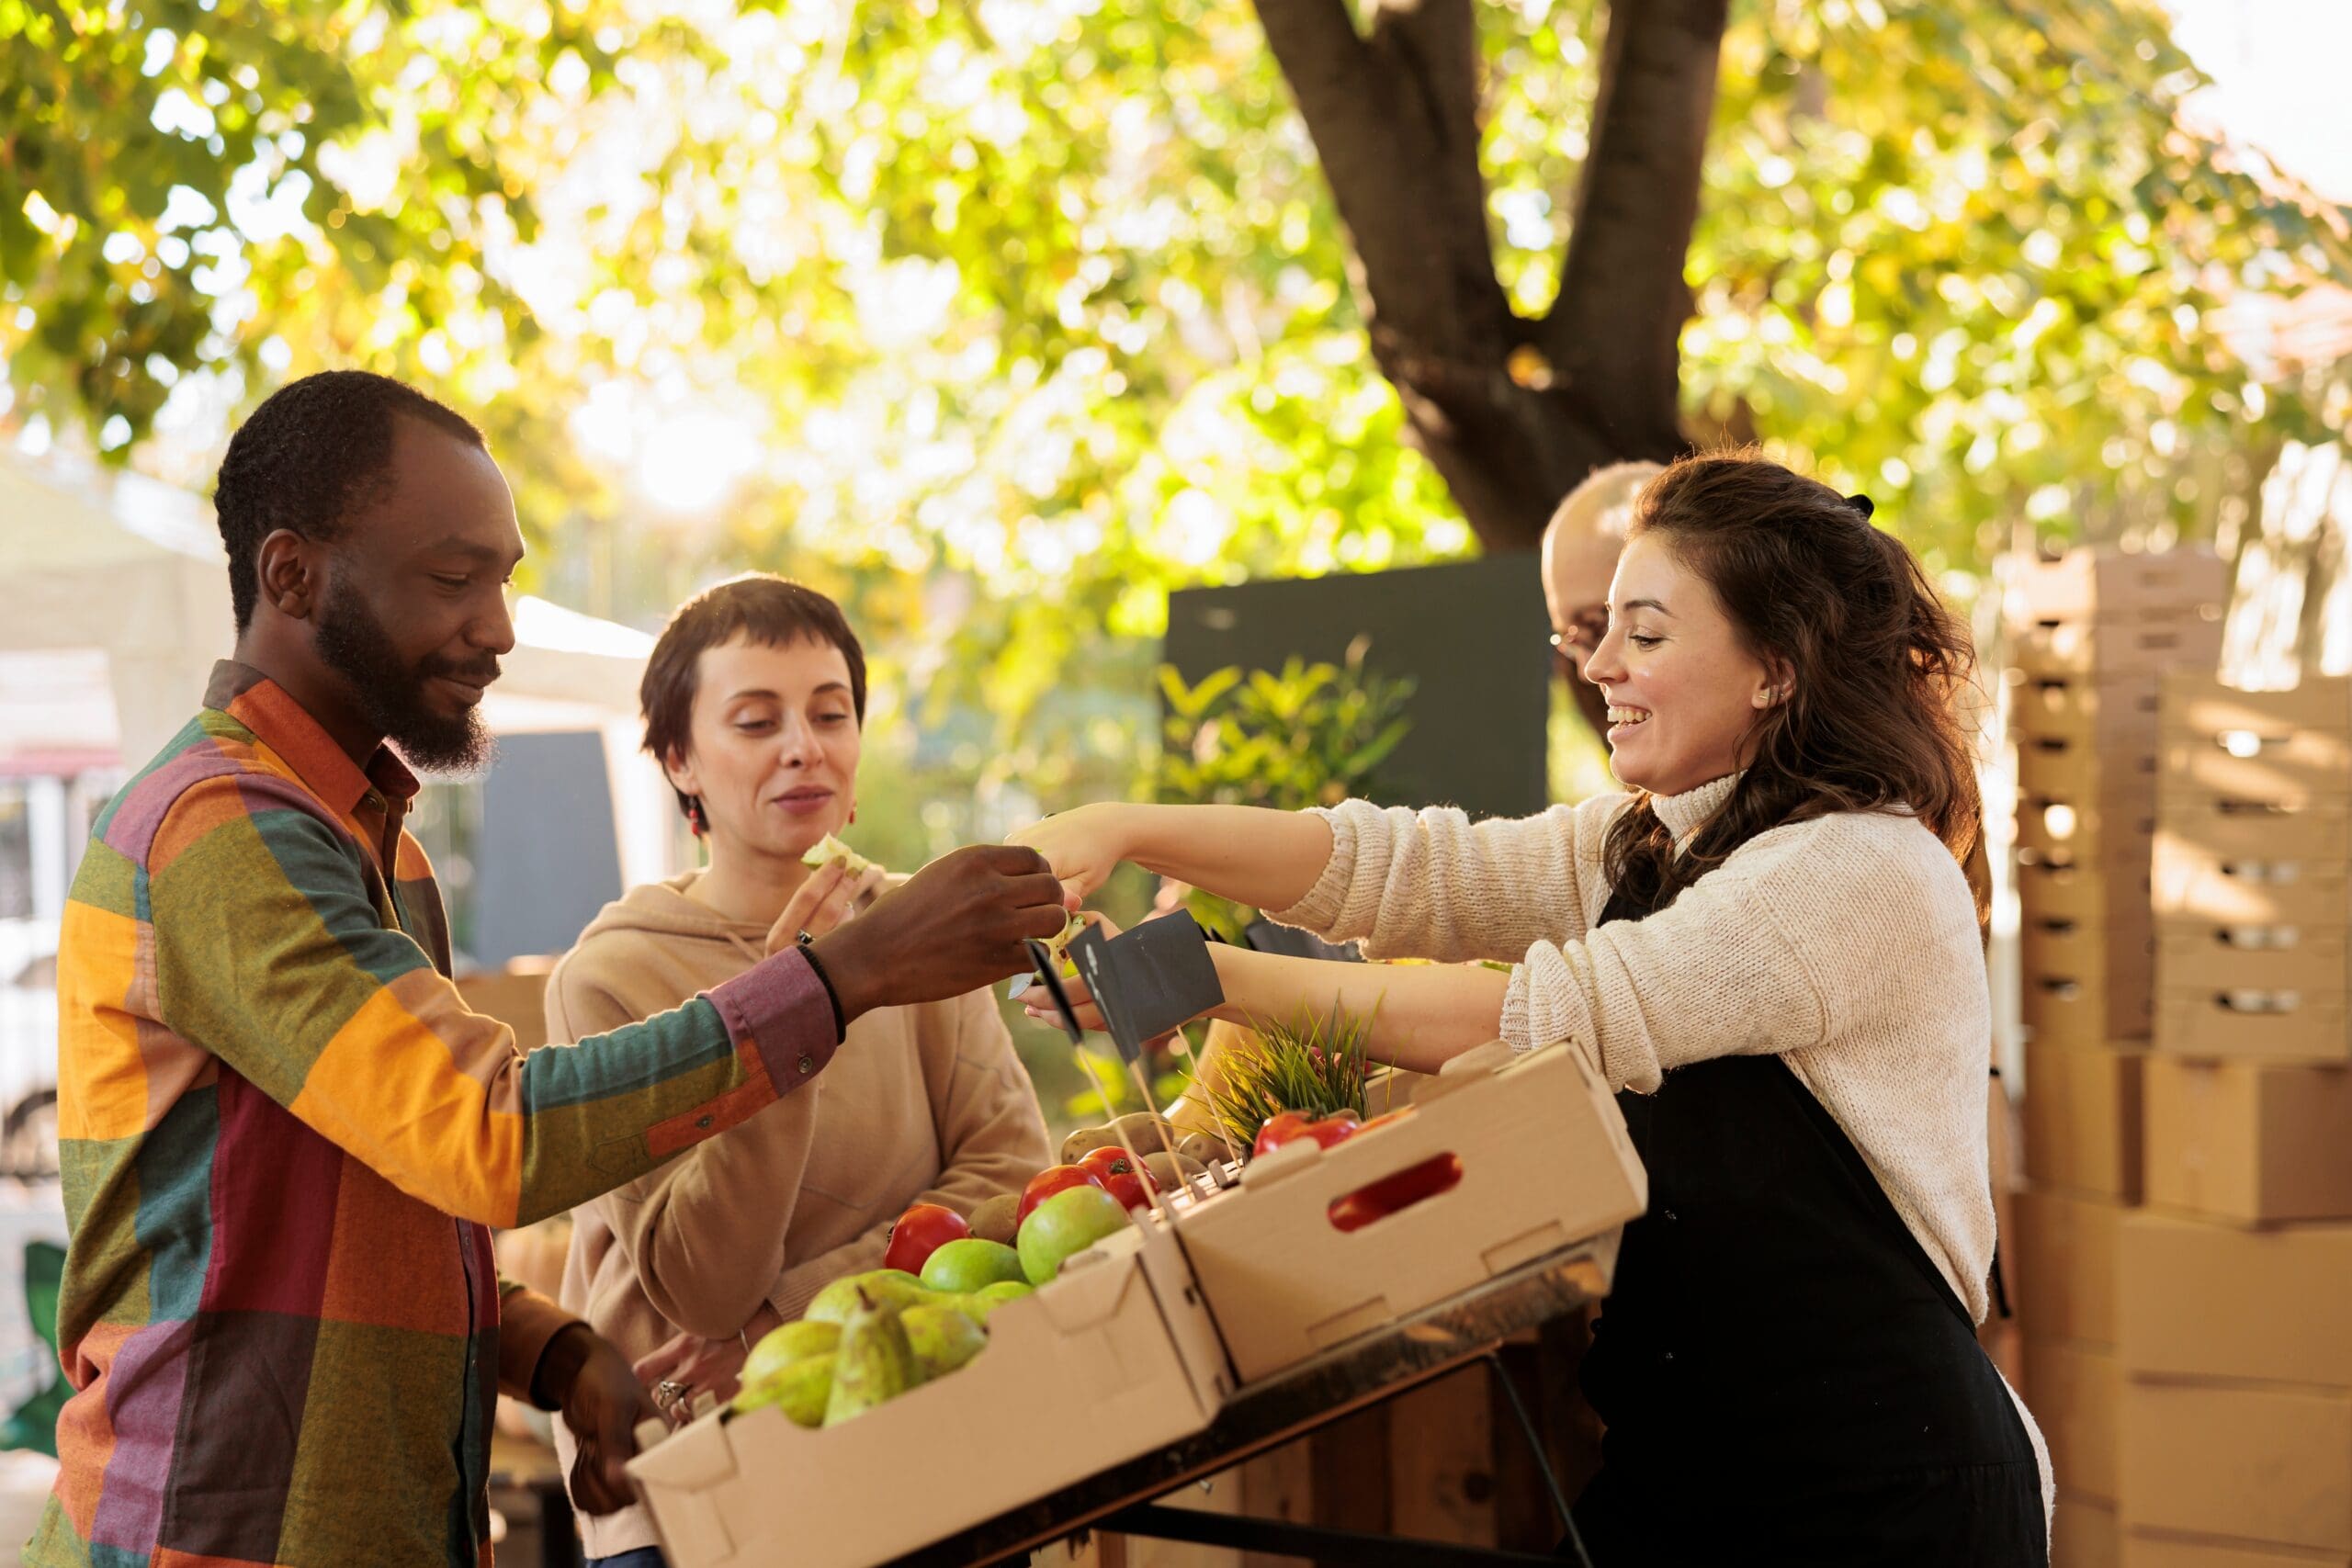 Vendor,Offering,Samples,To,Customers,While,Selling,Home-grown,Fruits,And